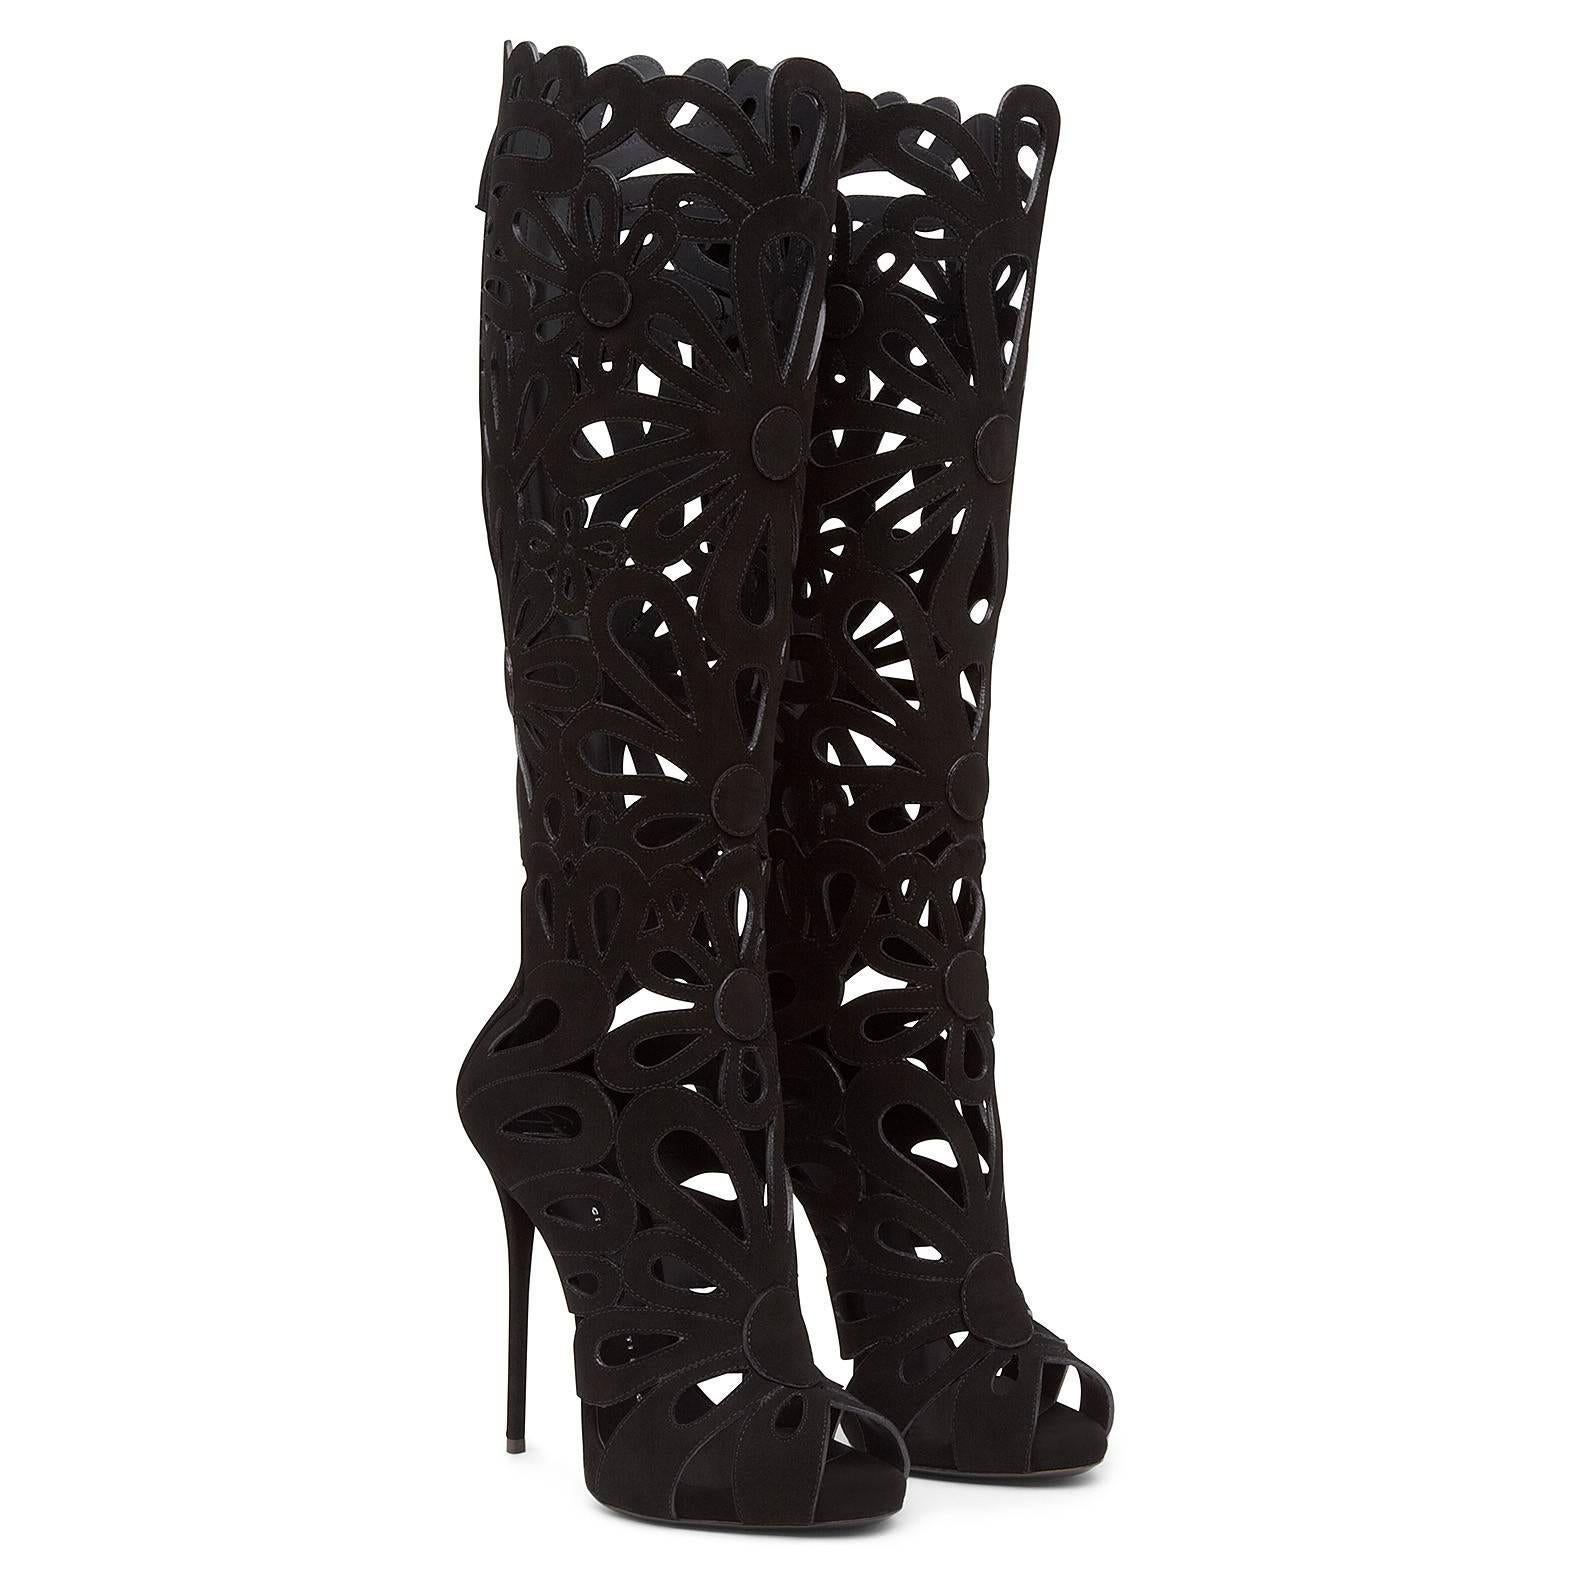 Women's Giuseppe Zanotti New Sold Out Black Suede Lattice Cut Out Heels Boots in Box